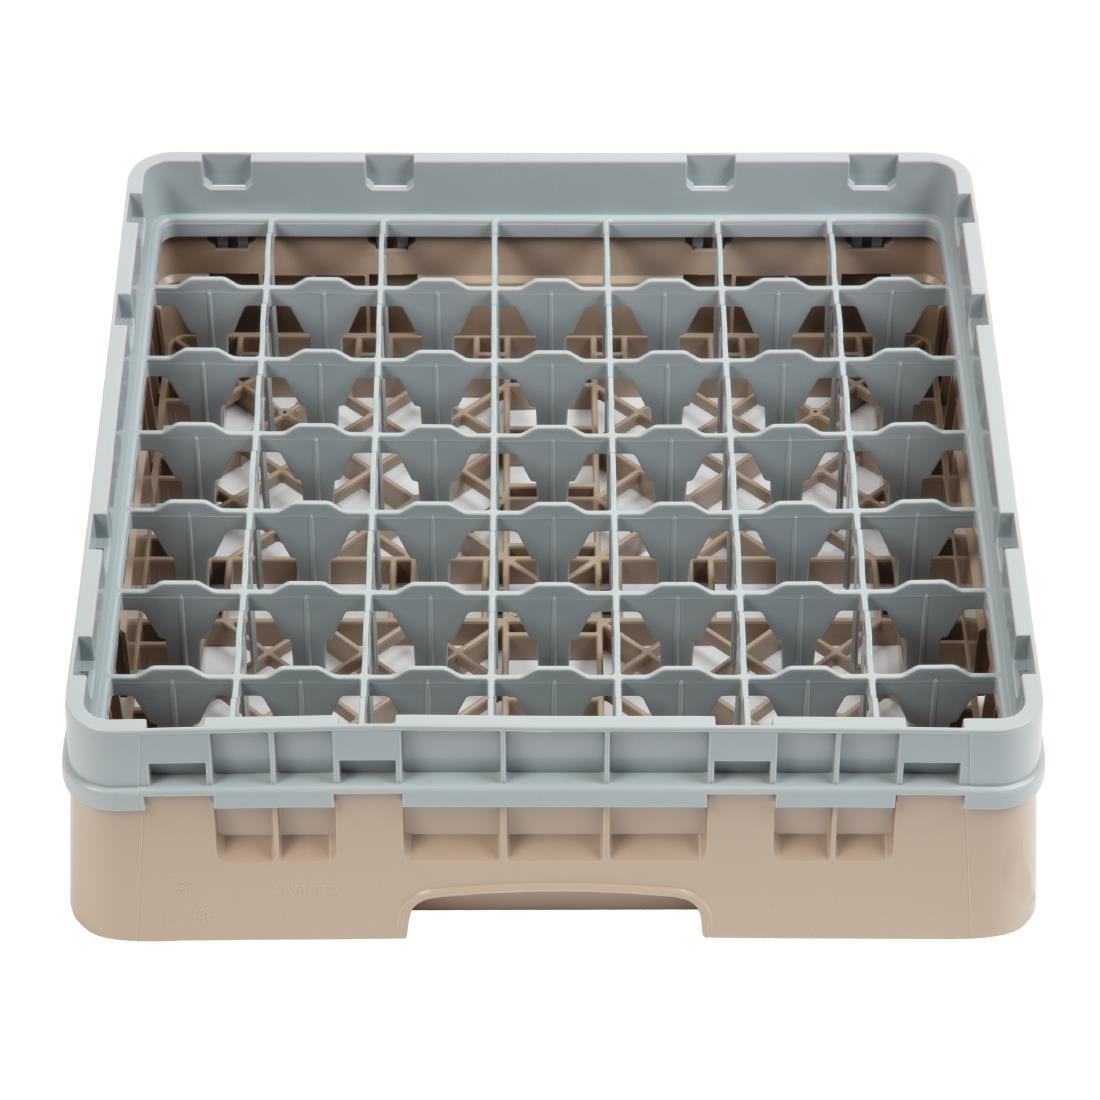 Cambro Camrack Beige 49 Compartments Max Glass Height 92mm - DW561  - 2